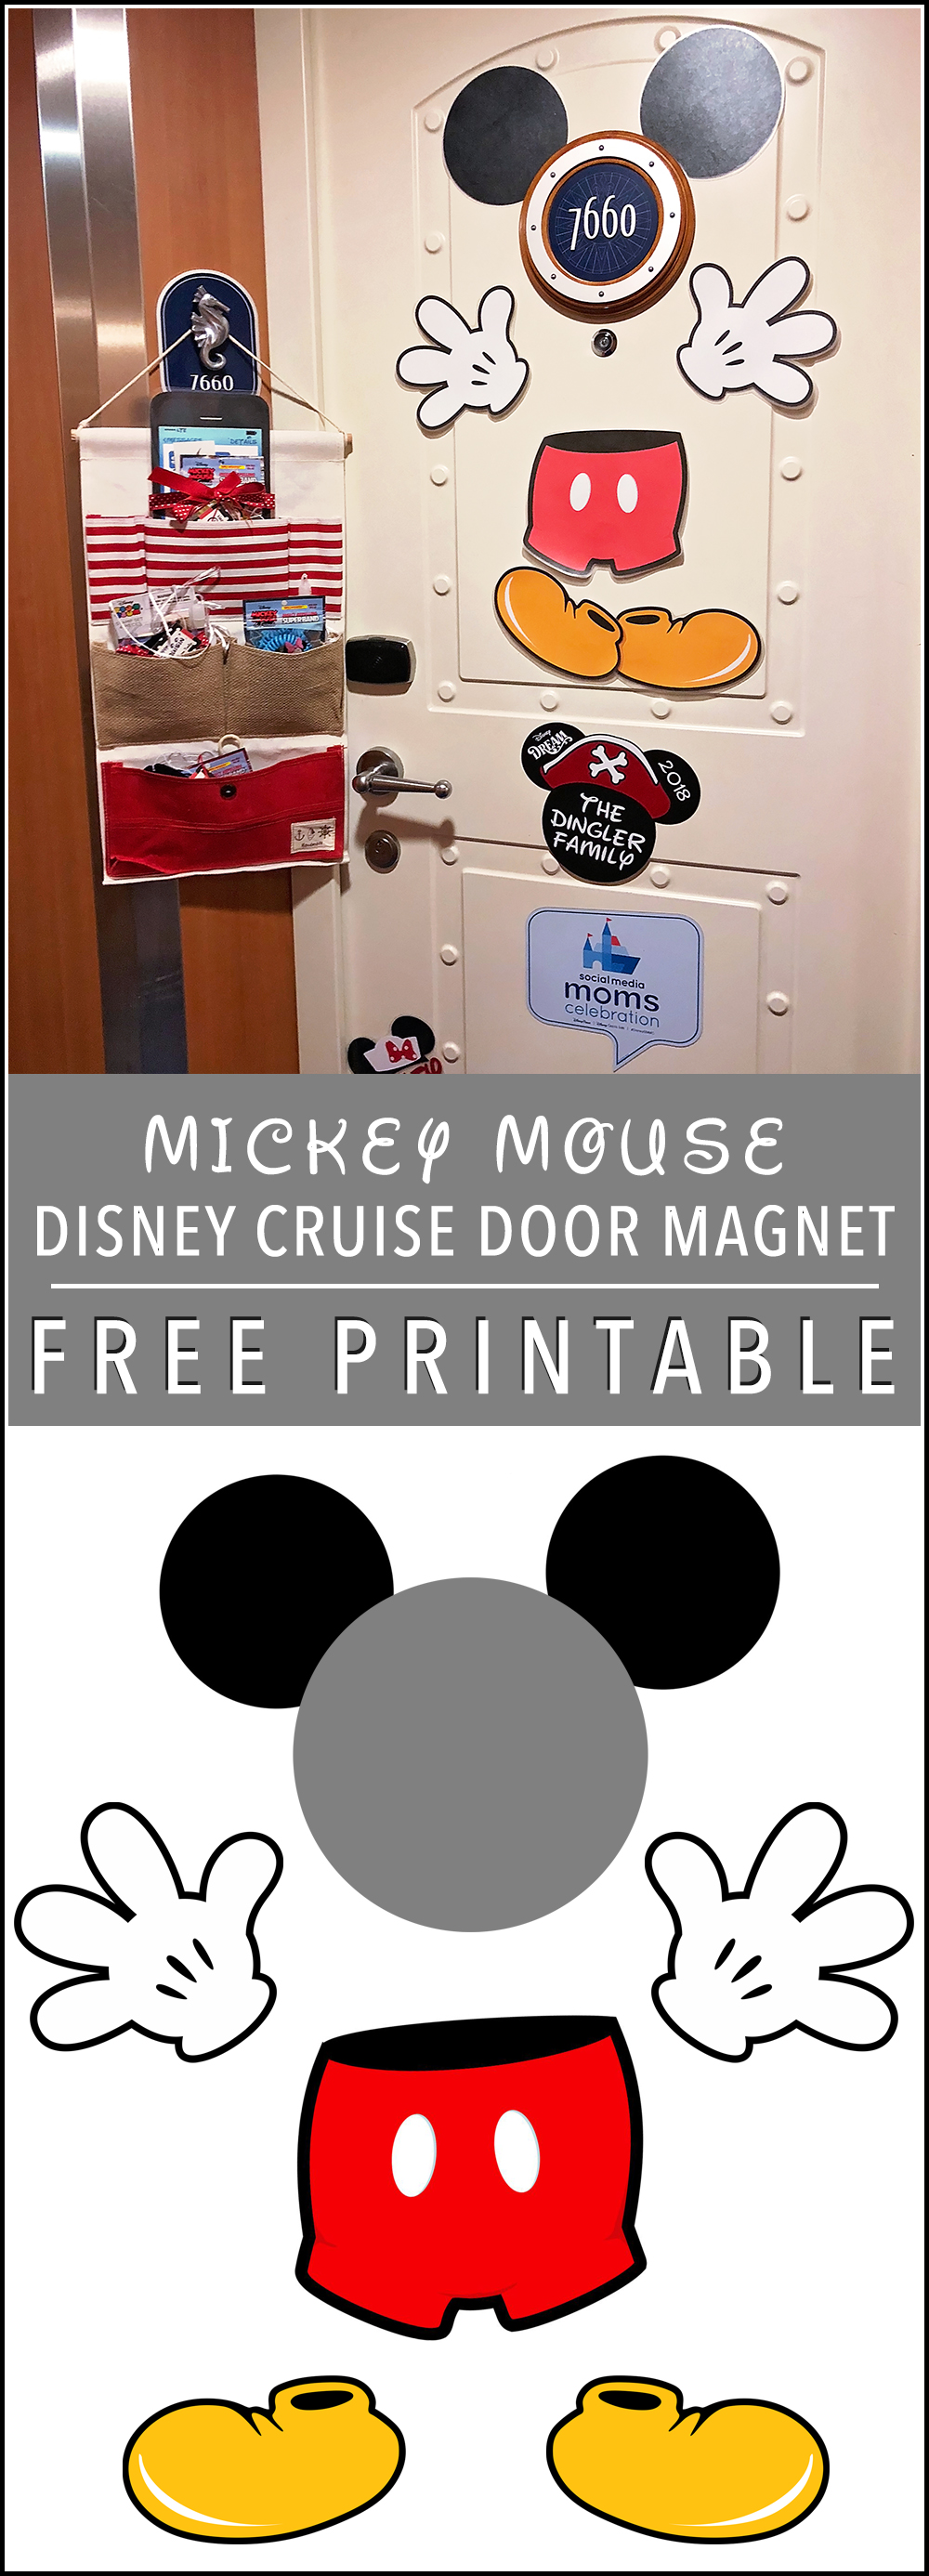 Disney Cruise Line Mickey Mouse Door Magnet FREE PRINTABLE